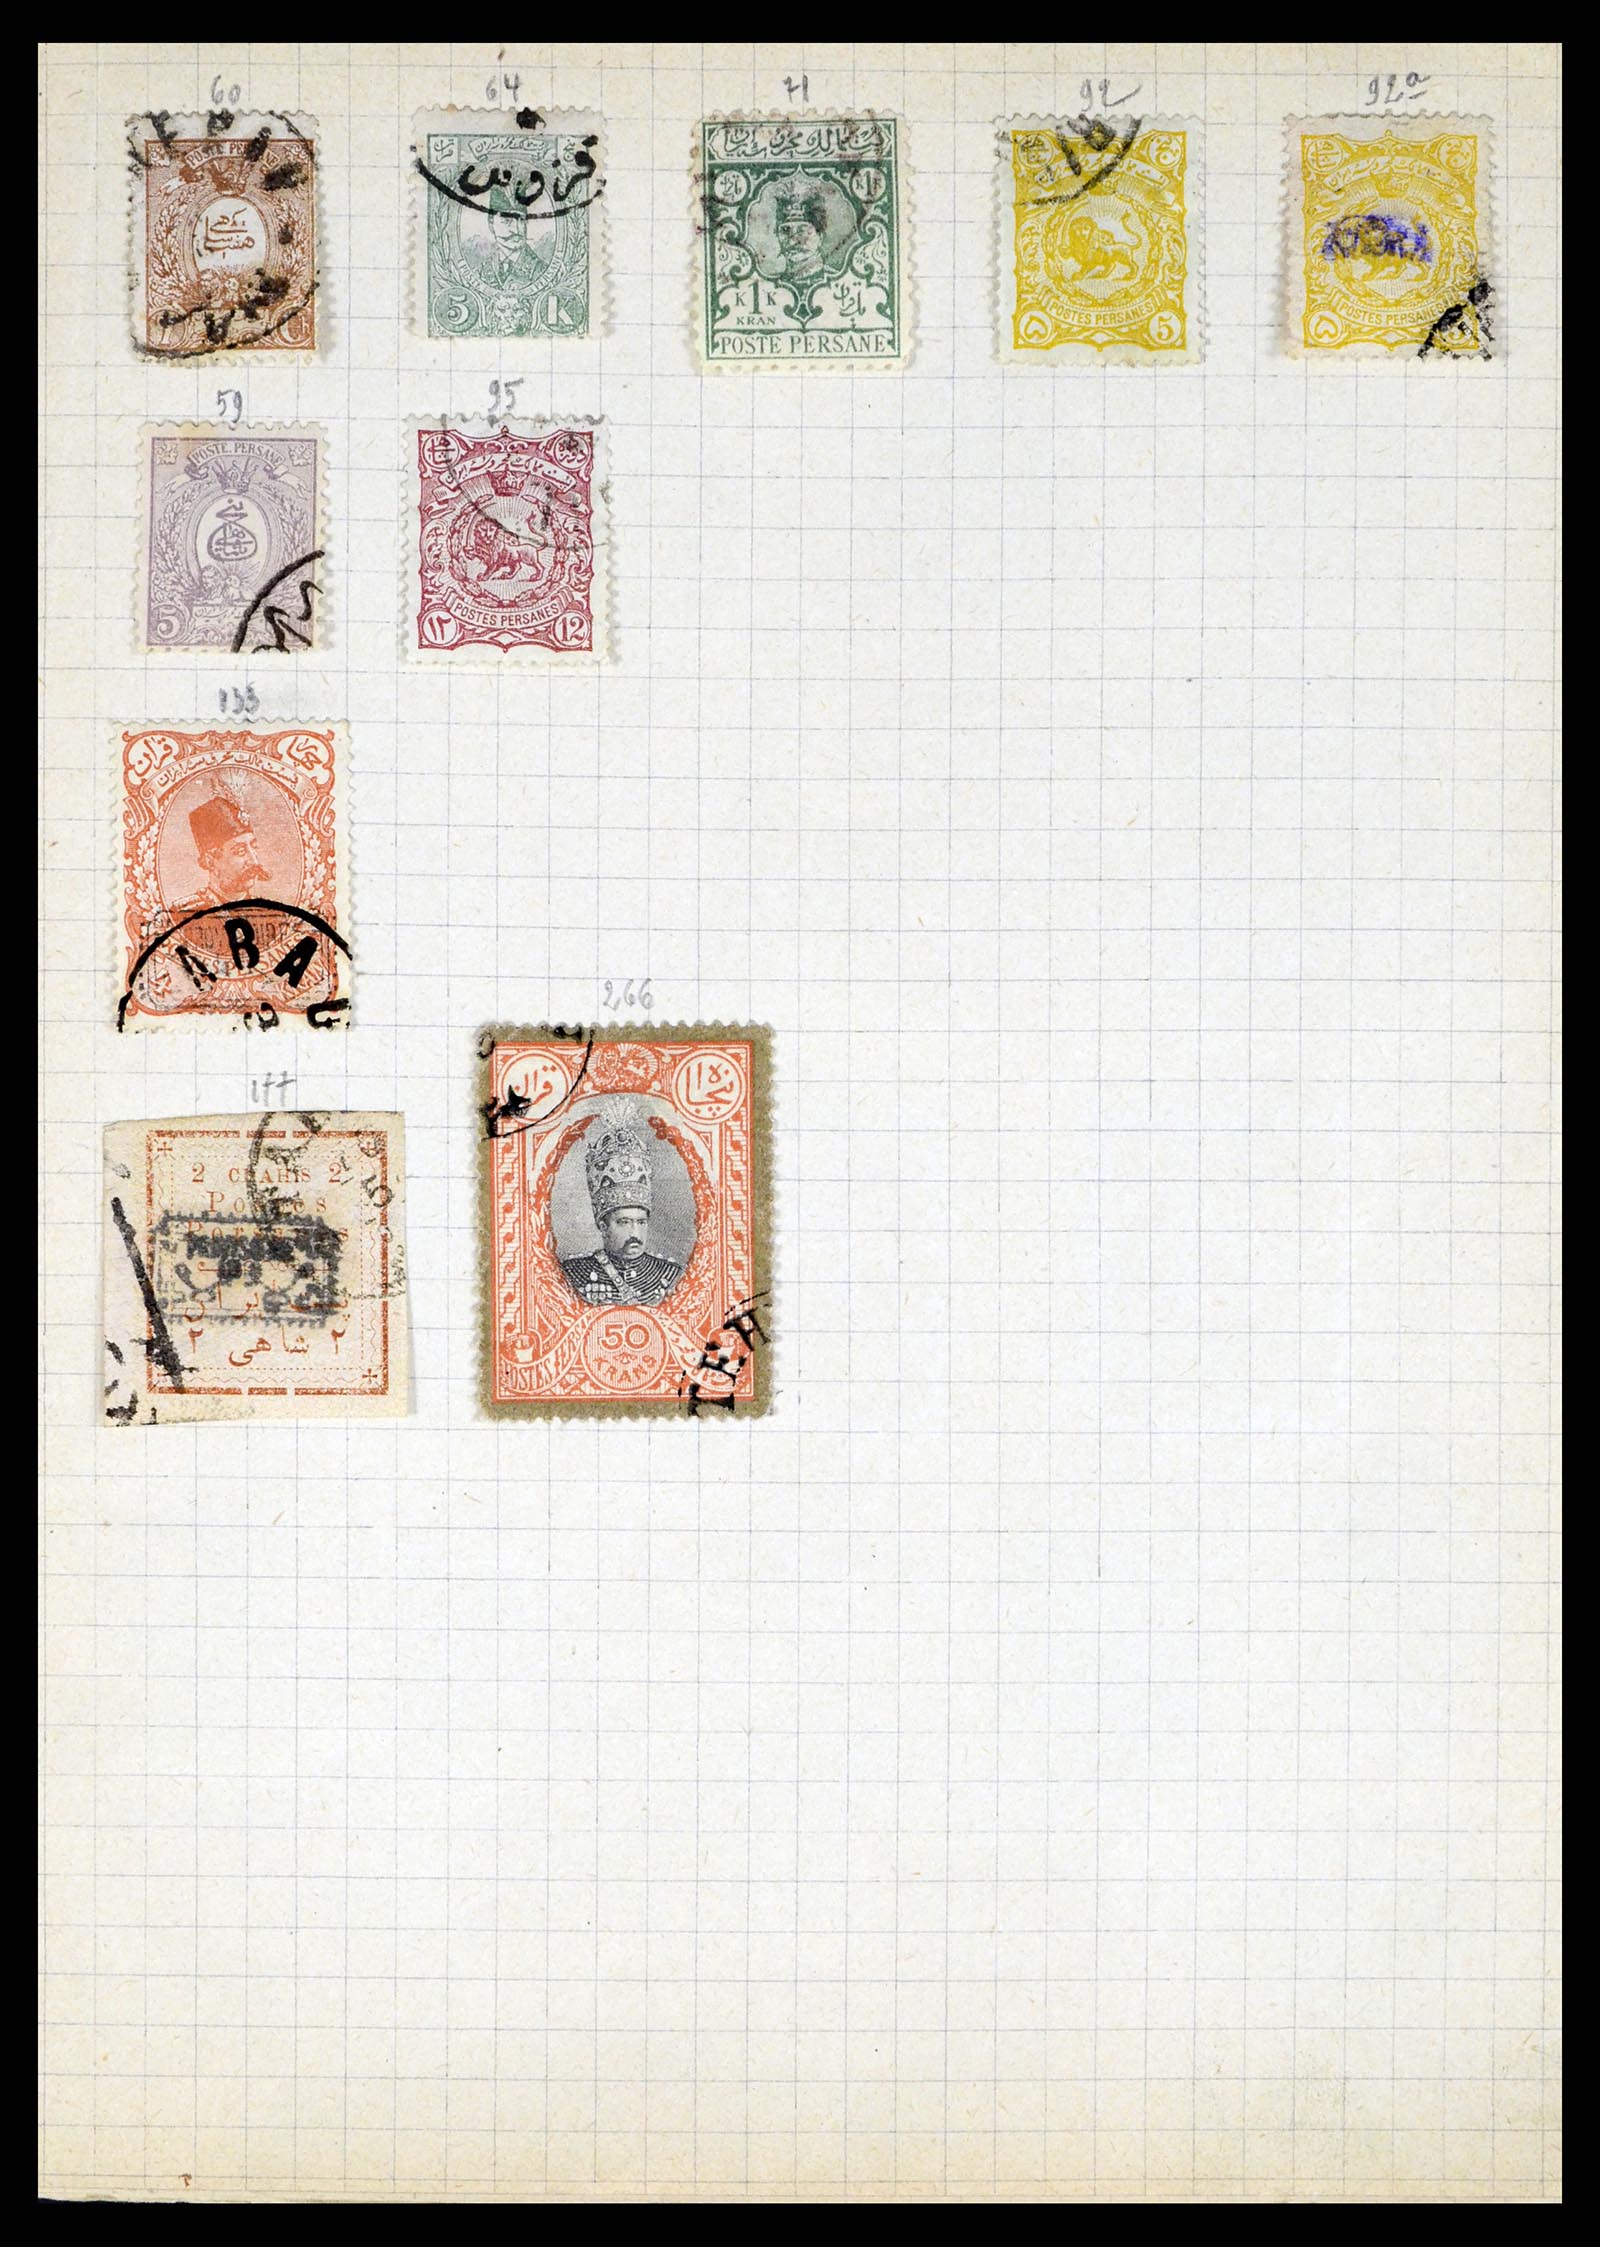 37280 001 - Stamp collection 37280 World classic 1840-1900.